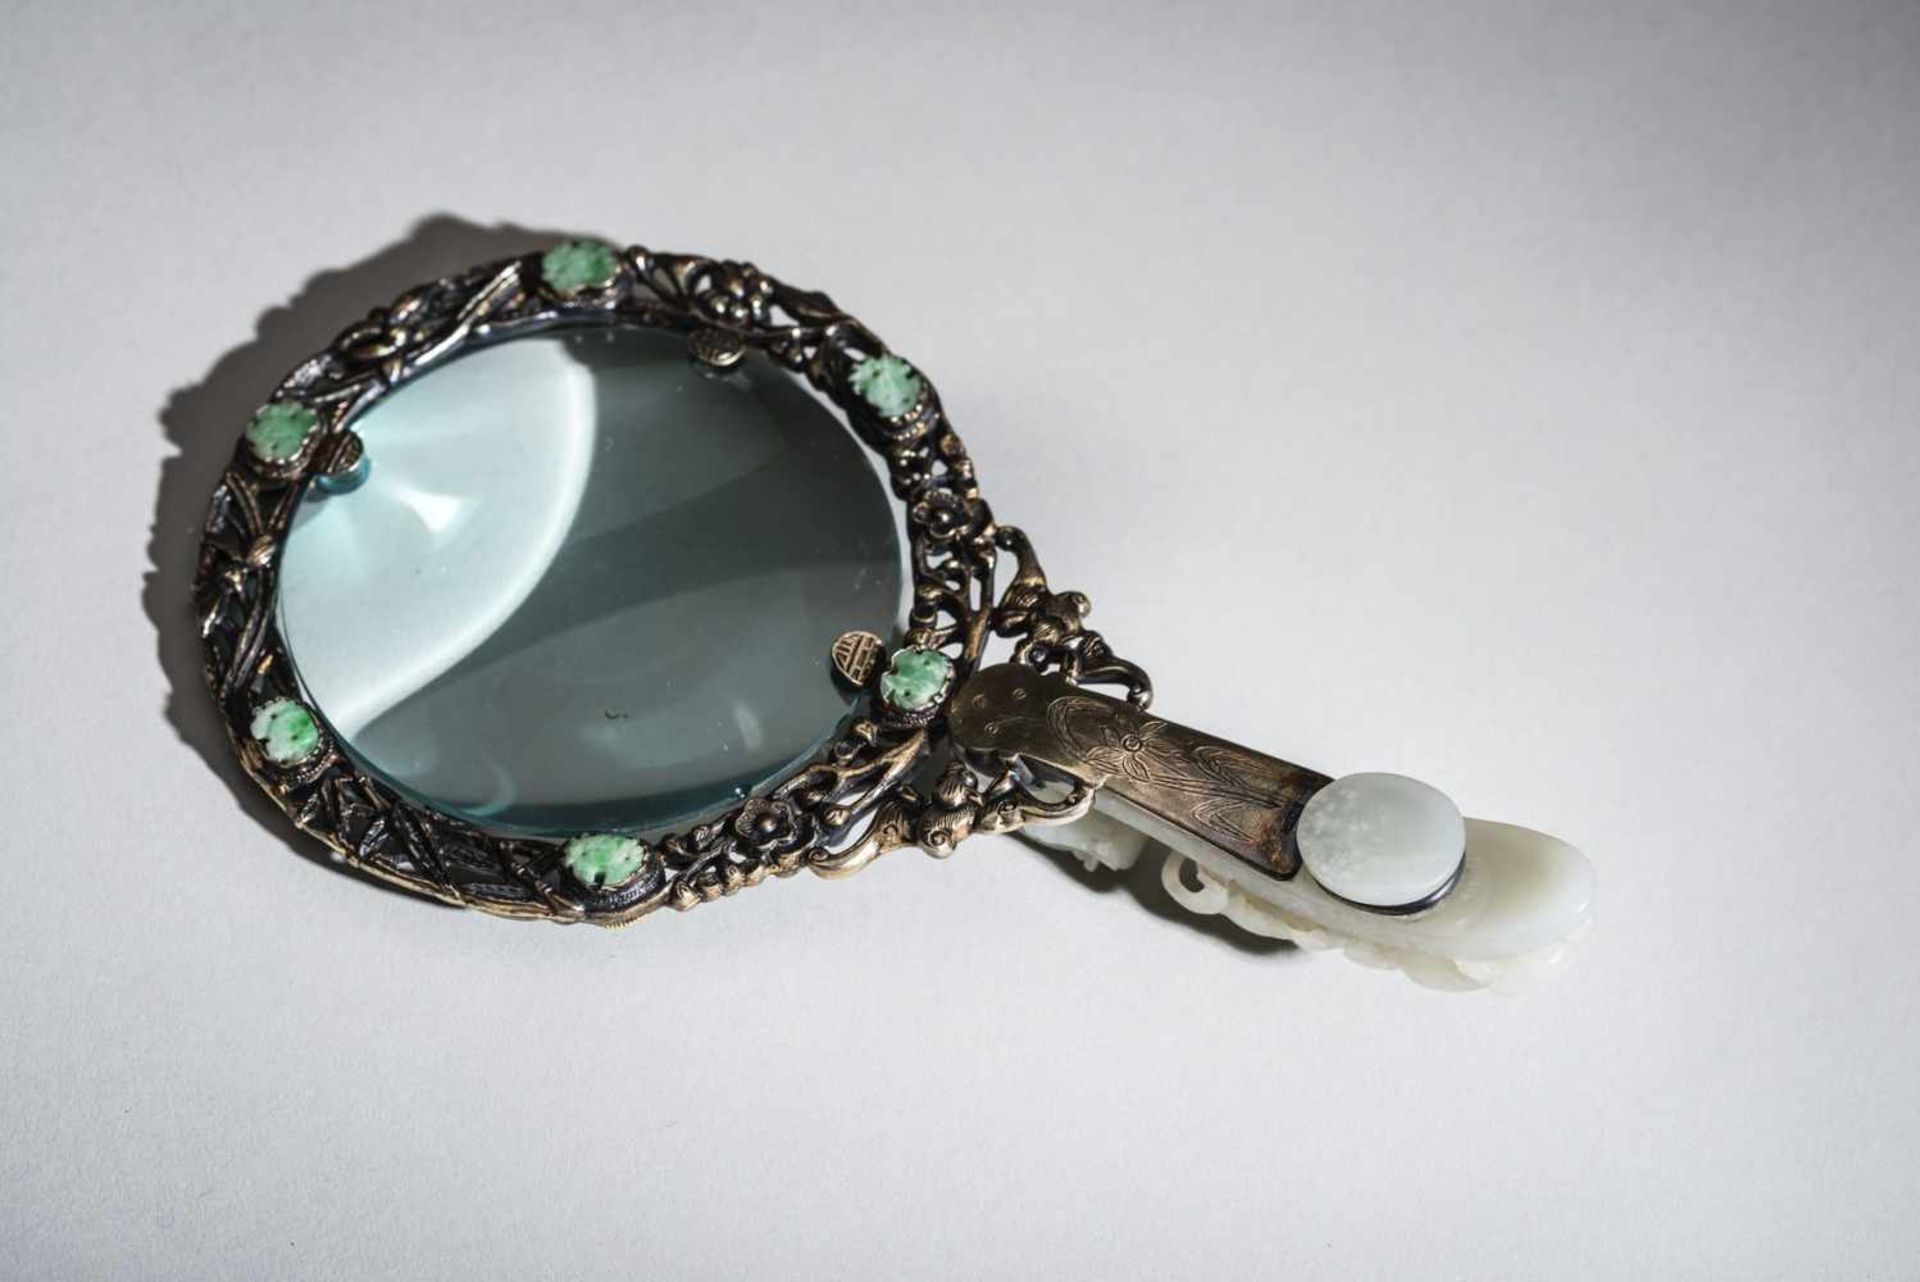 MAGNIFYING GLASS WITH DECORATIVE FRAME Fire-gilded bronze, jade, glass. China, Qing (1644-1911) Rare - Image 4 of 4